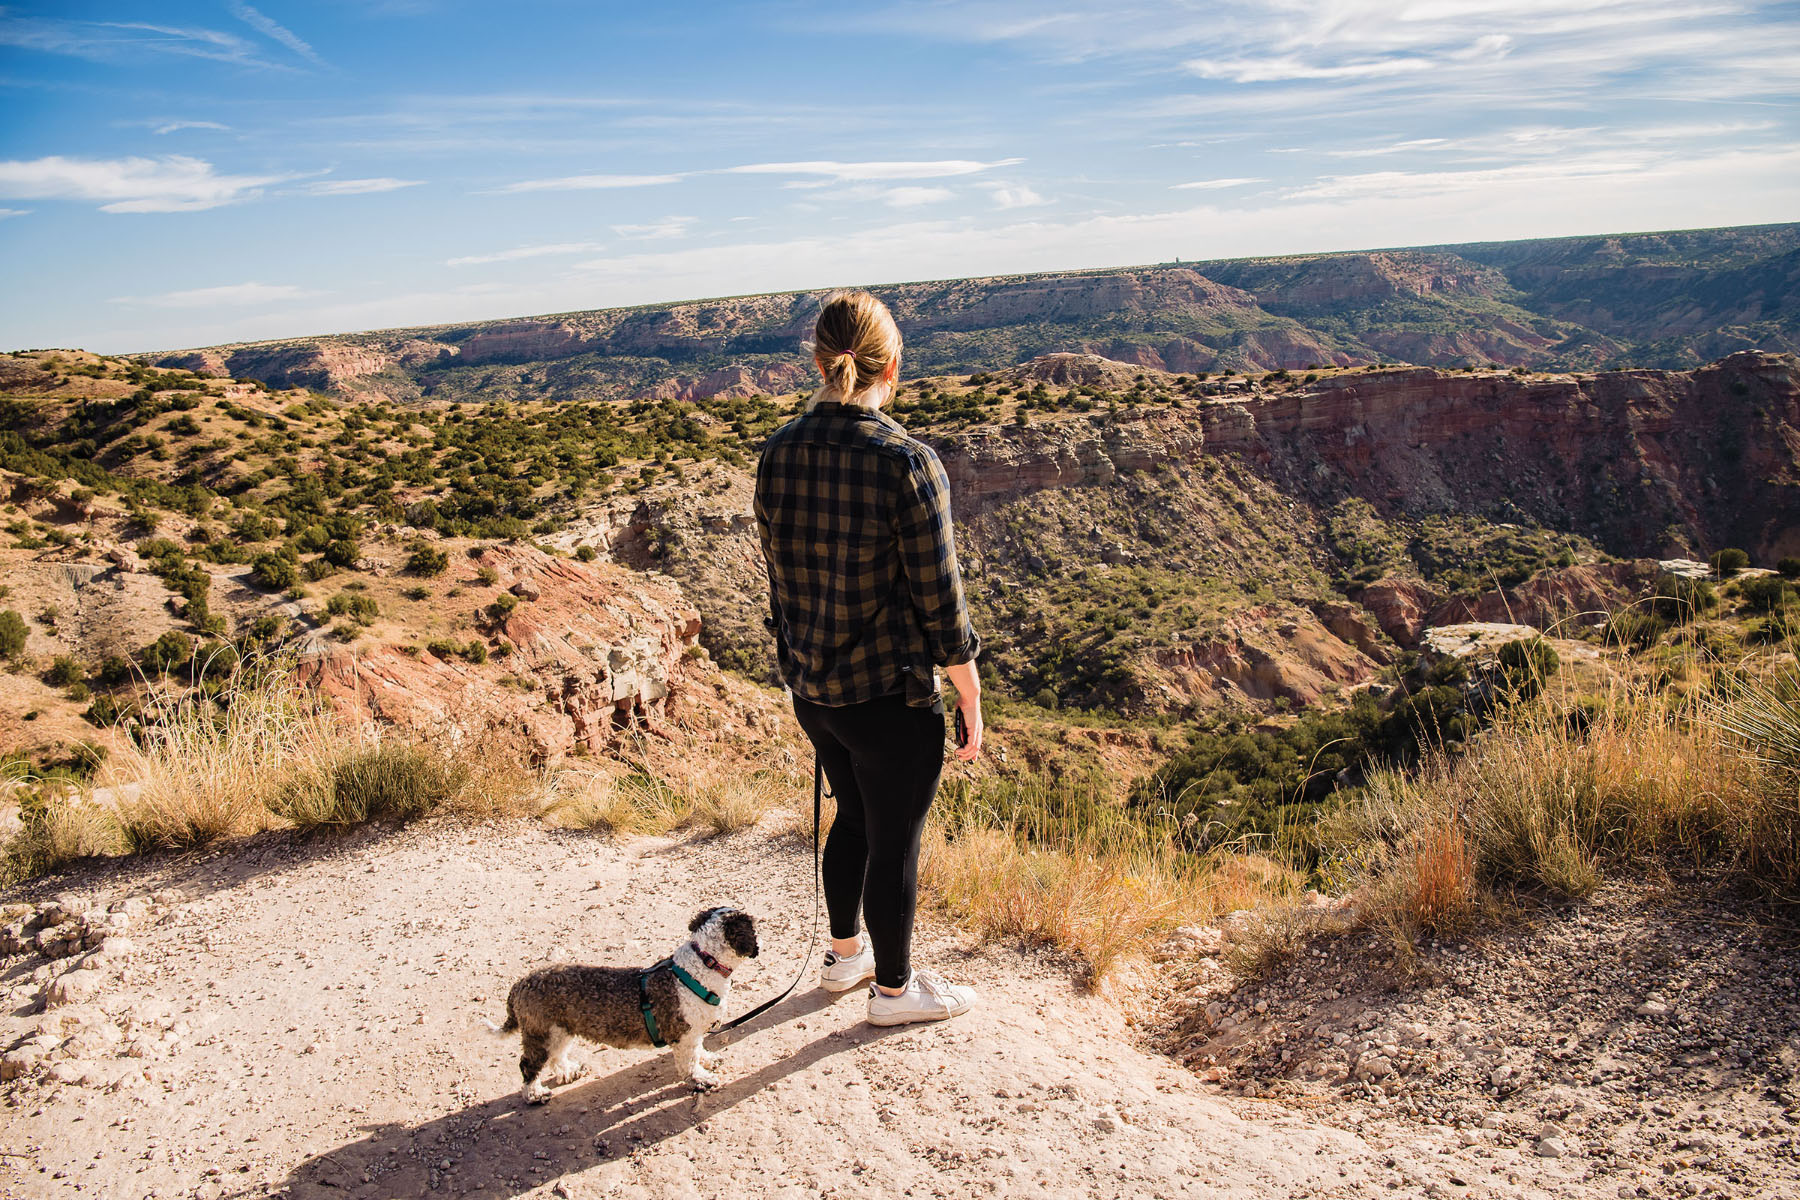 A woman stands with her dog on a dirt path looking at the brown-green canyons of Palo Duro